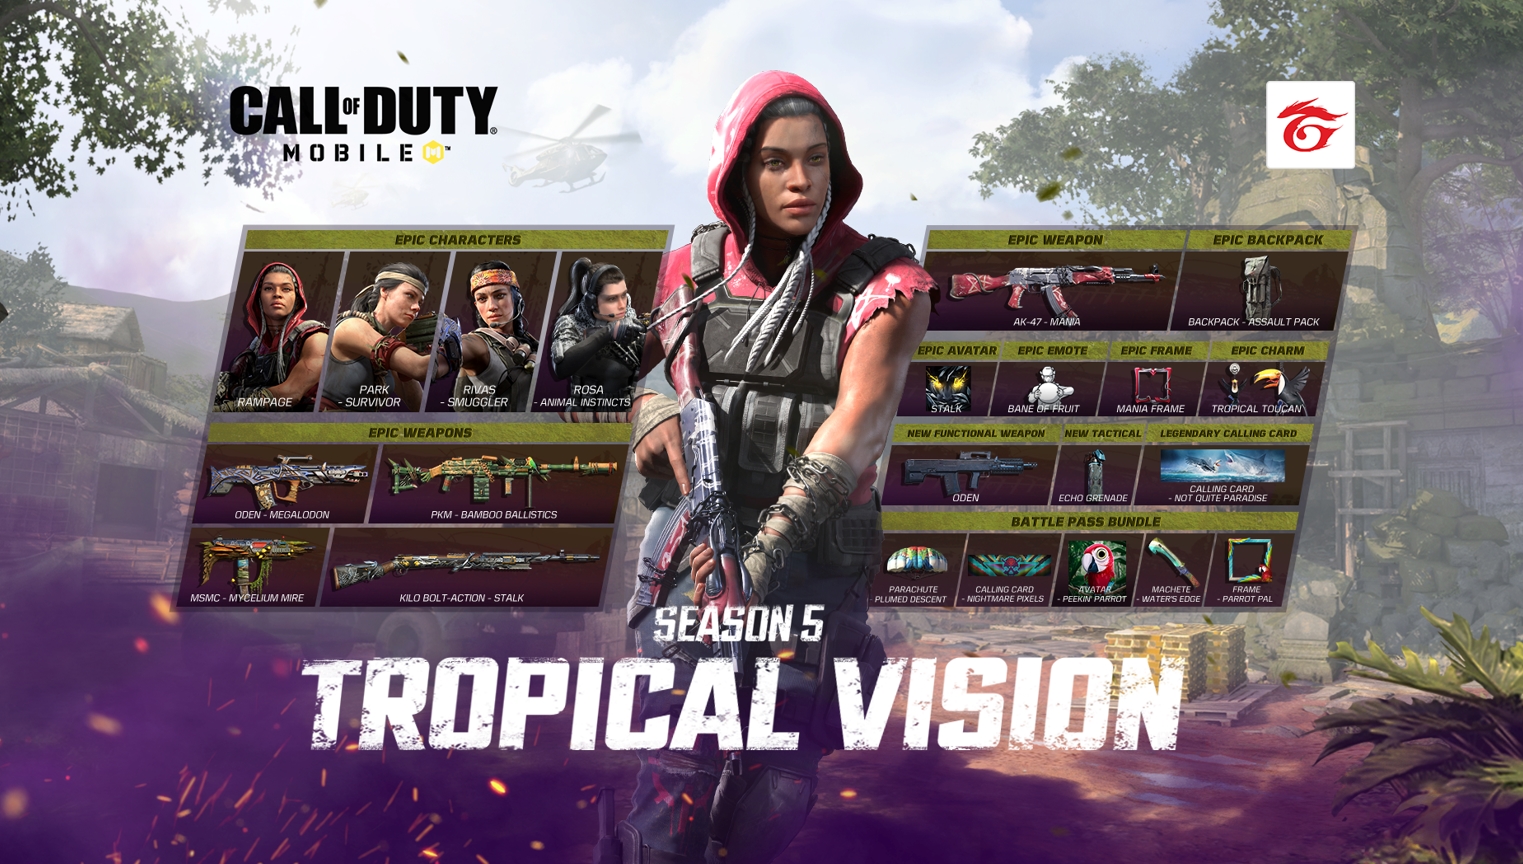 Call of Duty Mobile Tropical Vision